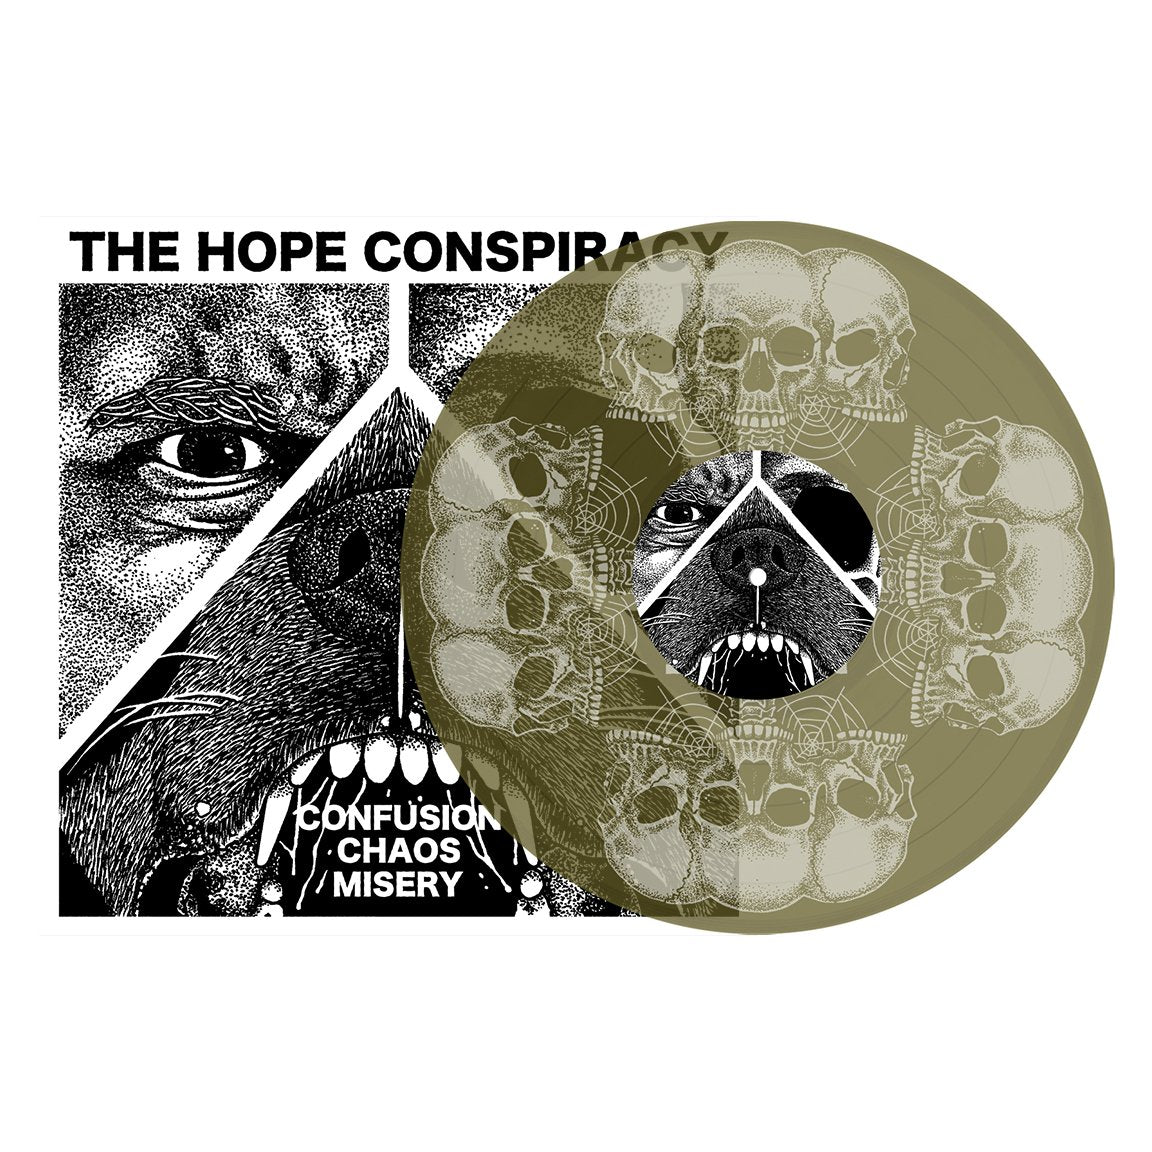 The Hope Conspiracy: Confusion / Chaos / Misery: Swamp Green Vinyl EP - Steadfast Records